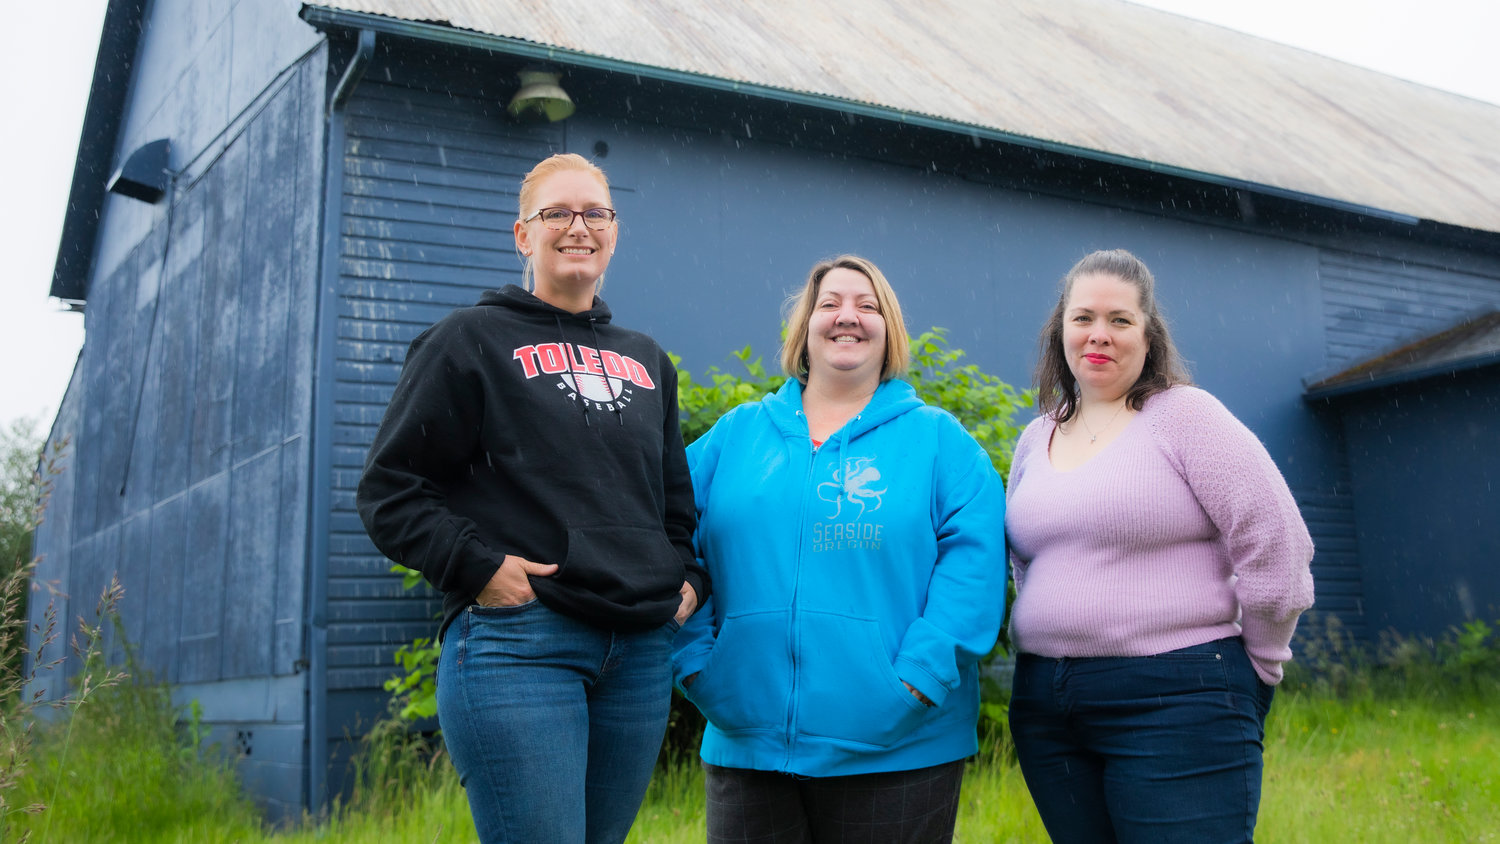 From left to right, Toledo Neighbors Vice President Brooke Acosta, President Amber Buck and Co-Treasurer Heather Garman pose for a photo outside in Toledo as it rains.